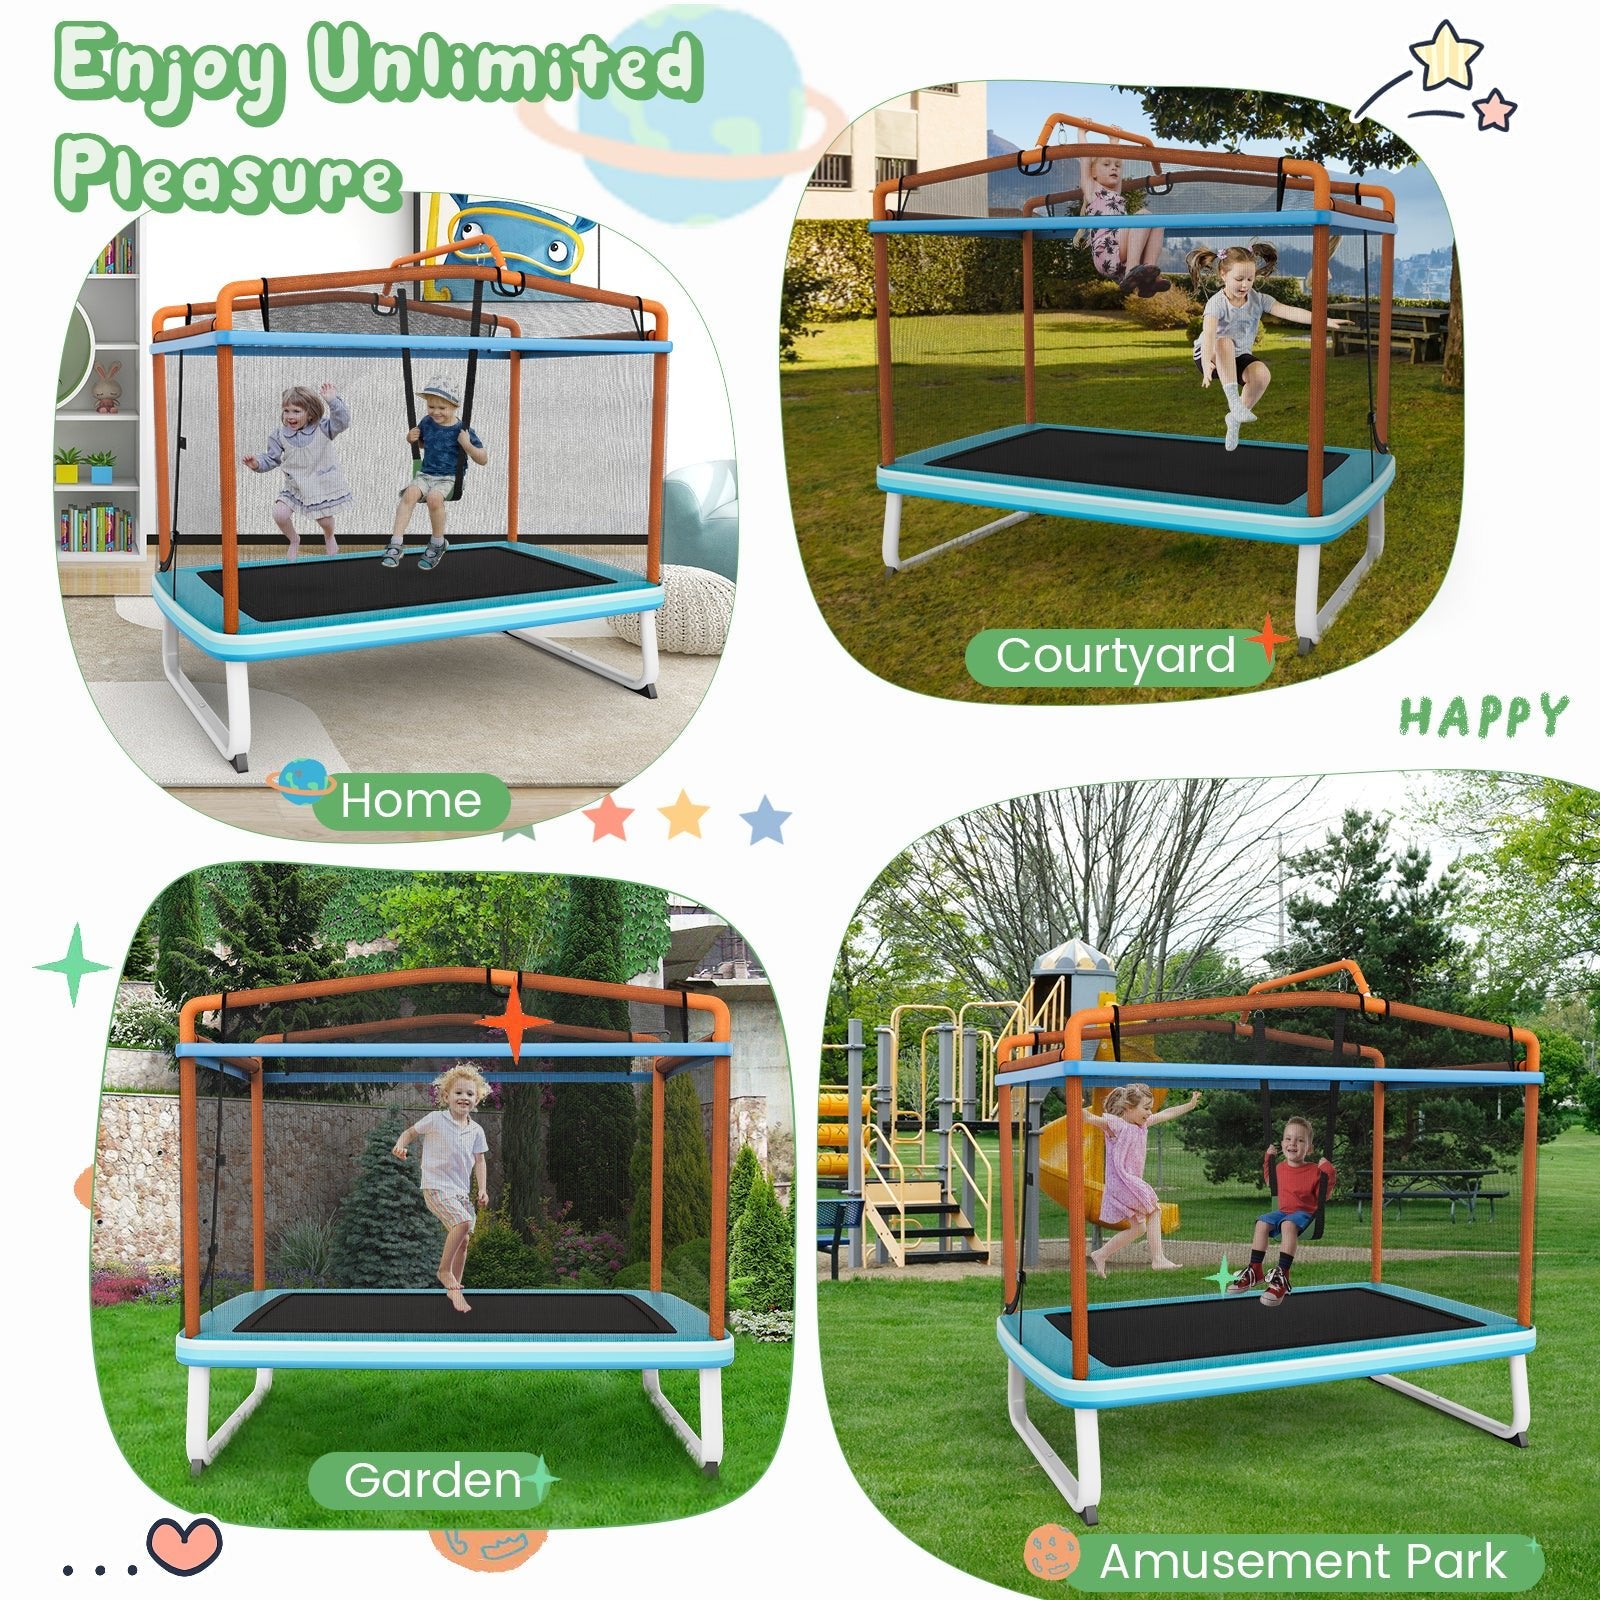 Playful Workout: 3-in-1 Rectangle Trampoline with Swing & Horizontal Bar Orange